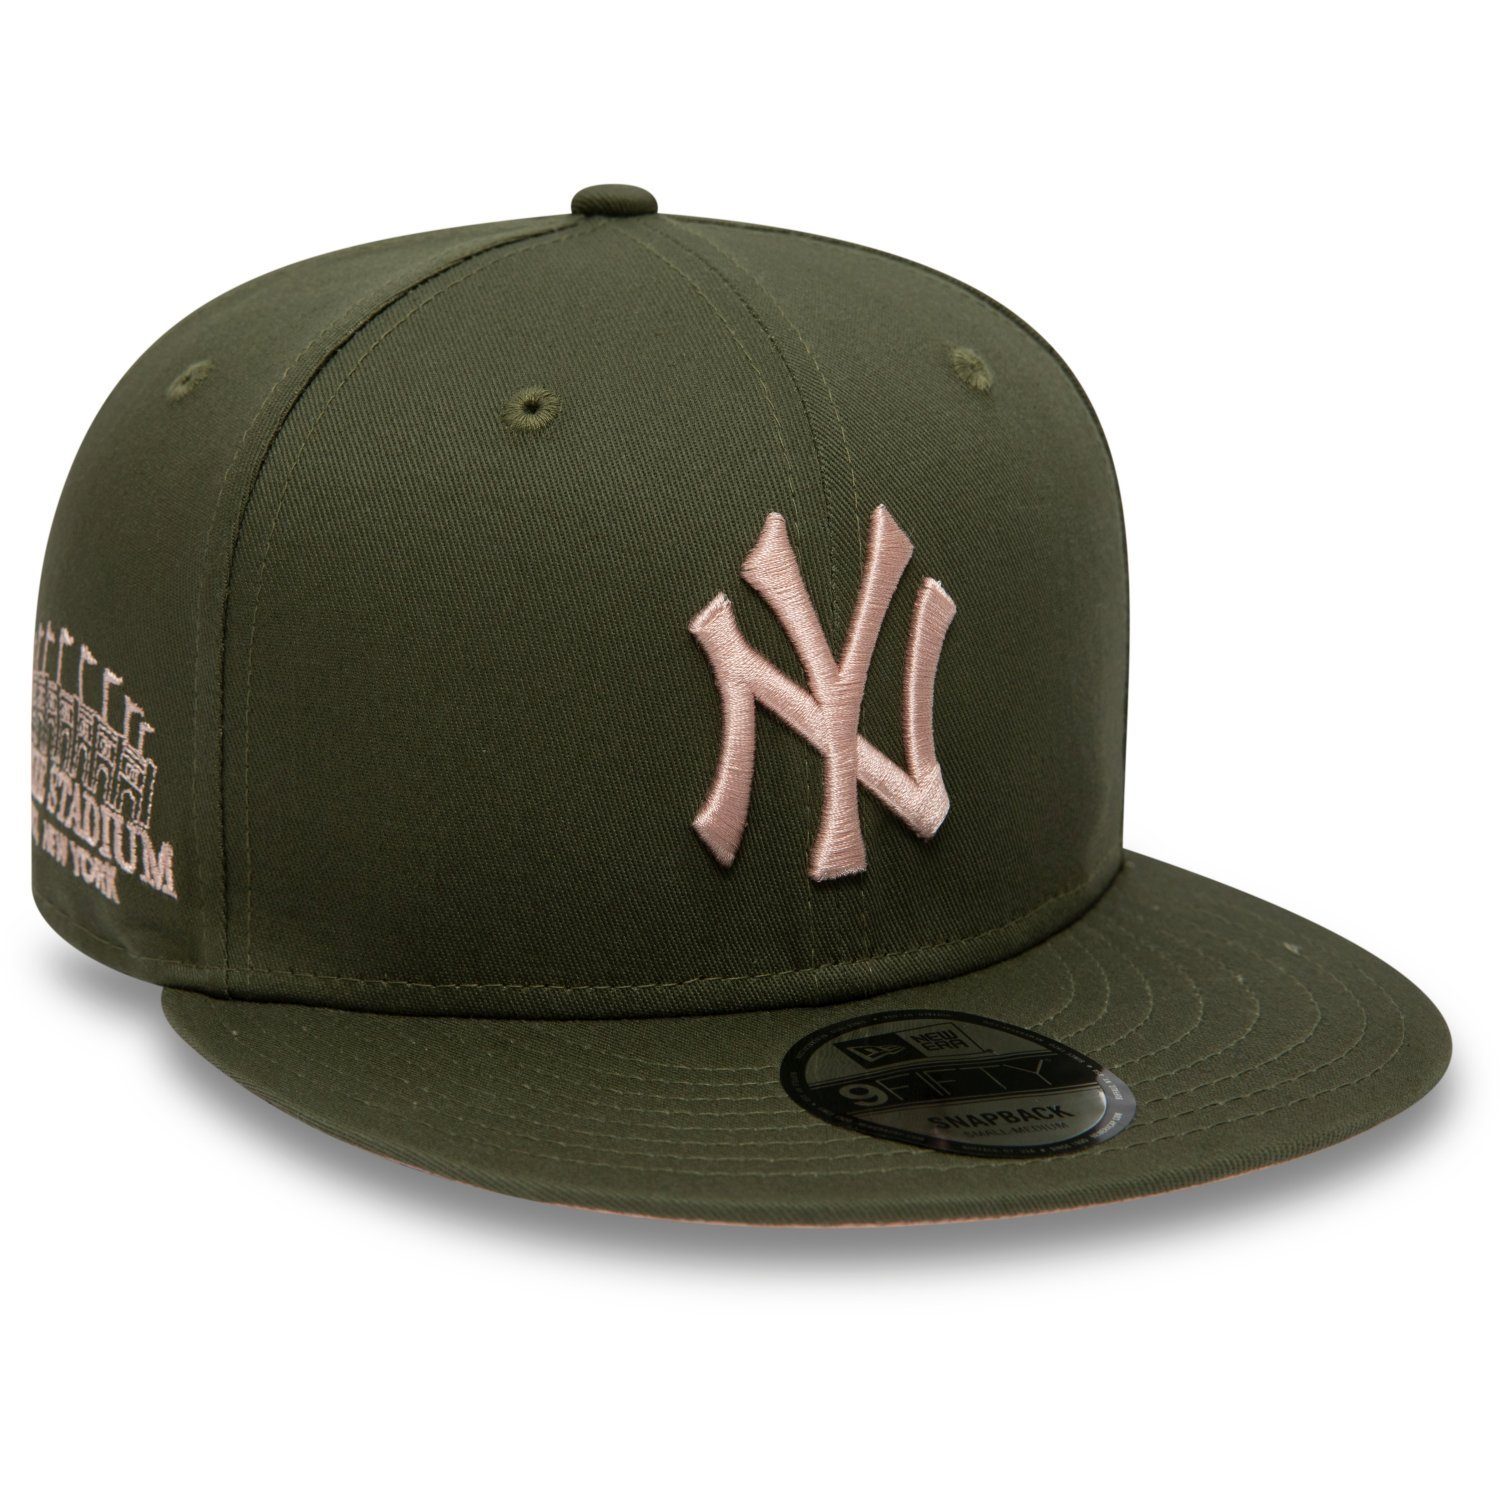 New York Yankees New SIDE Snapback Era 9Fifty Cap oliv PATCH